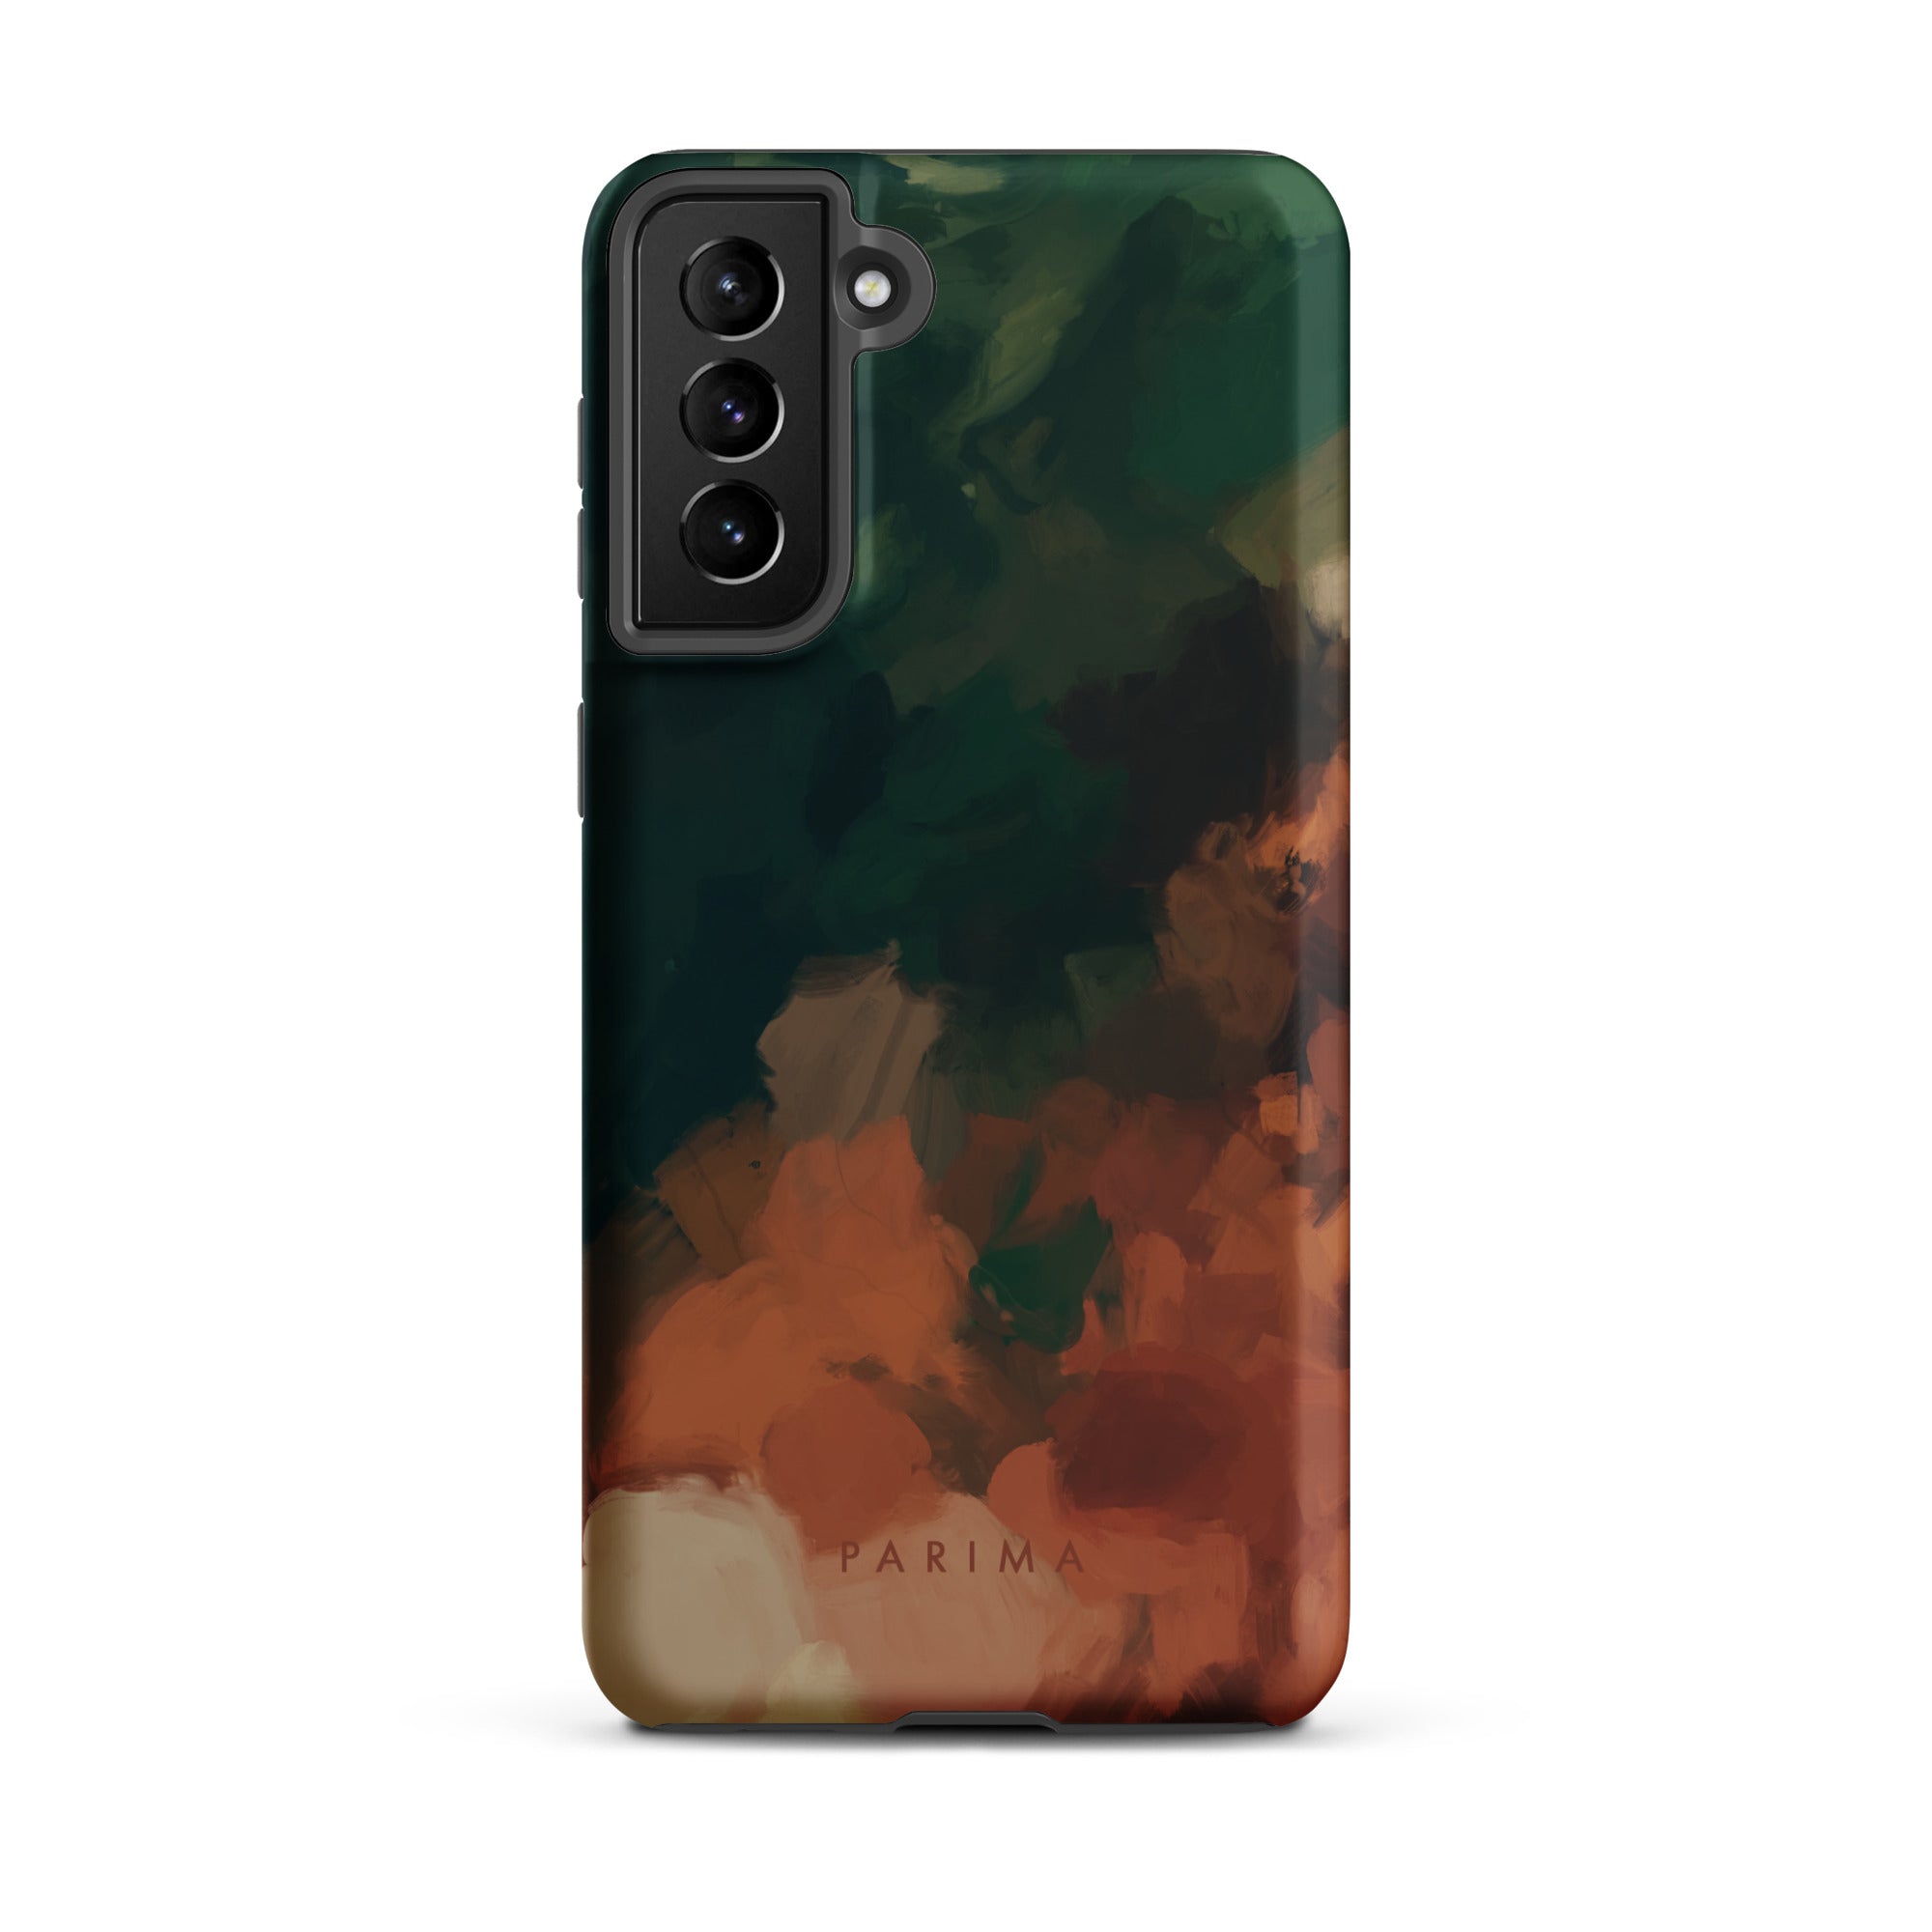 Cedar, green and brown abstract art on Samsung Galaxy S21 Plus tough case by Parima Studio